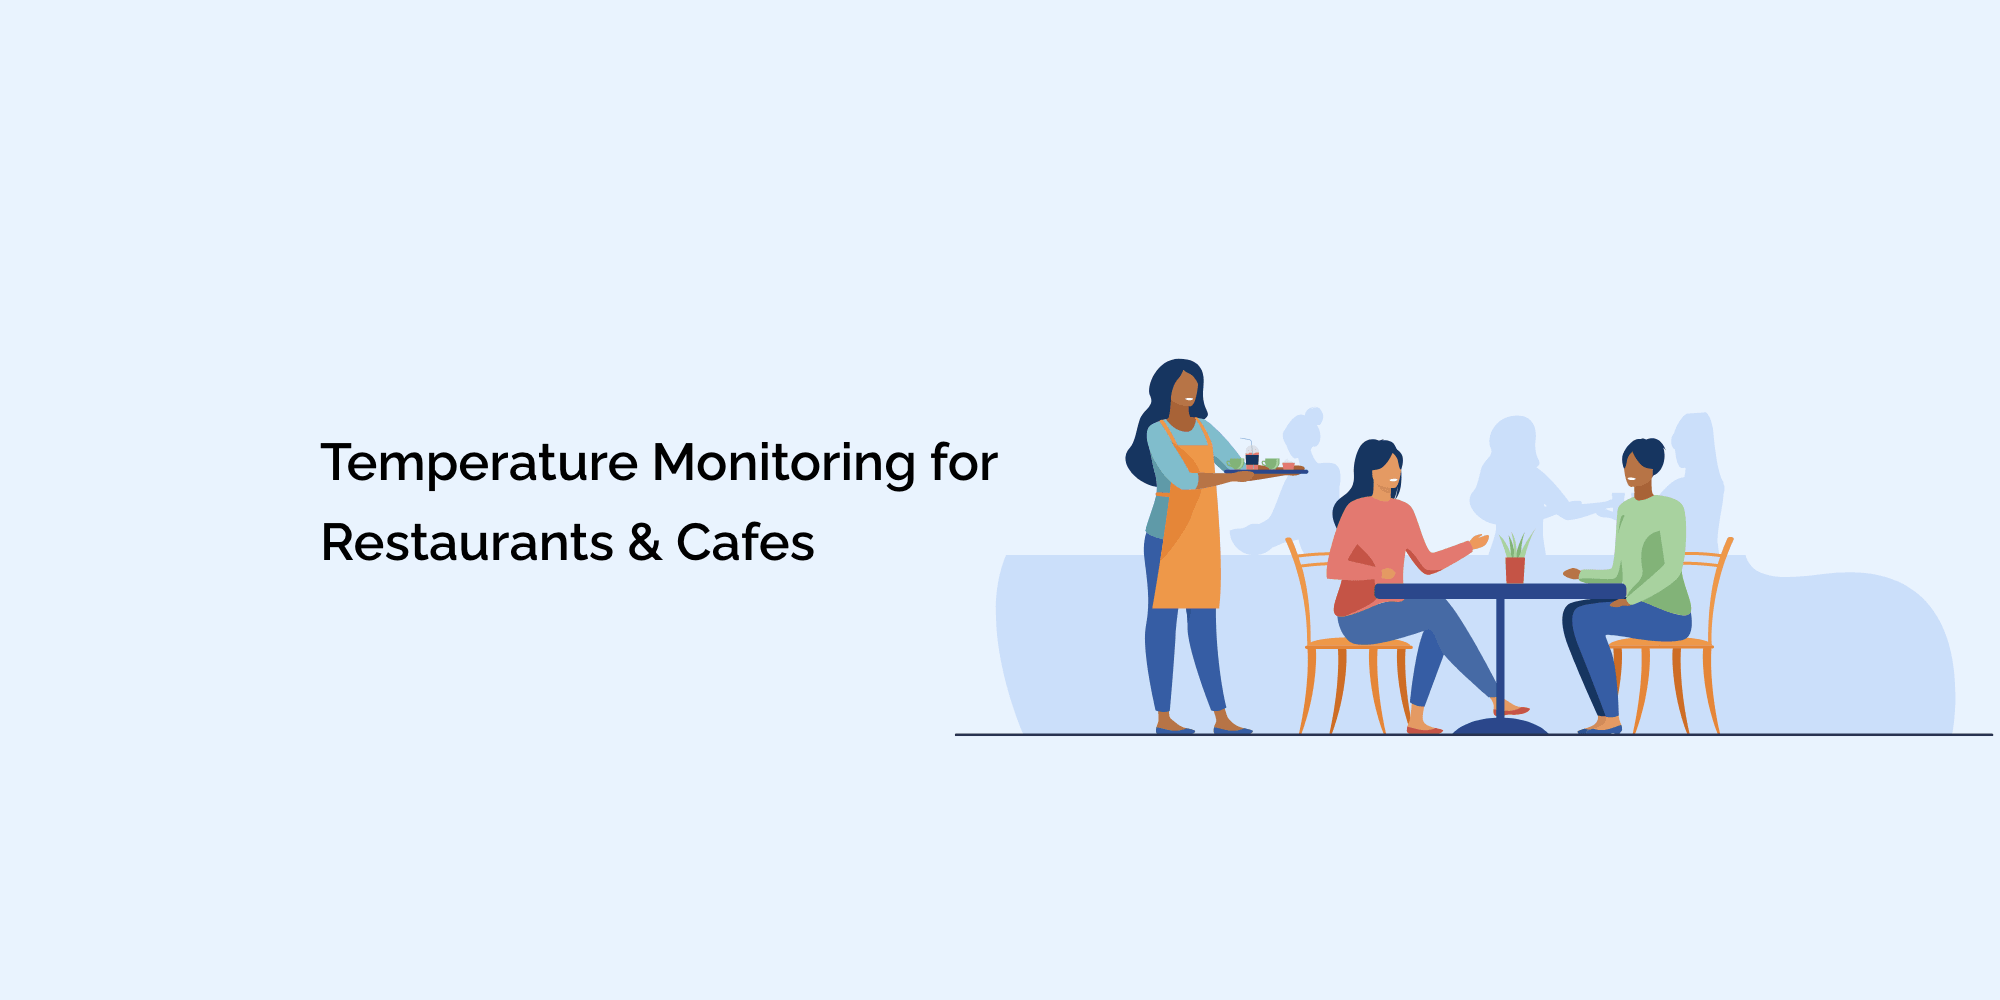 Temperature Monitoring for Restaurants & Cafes